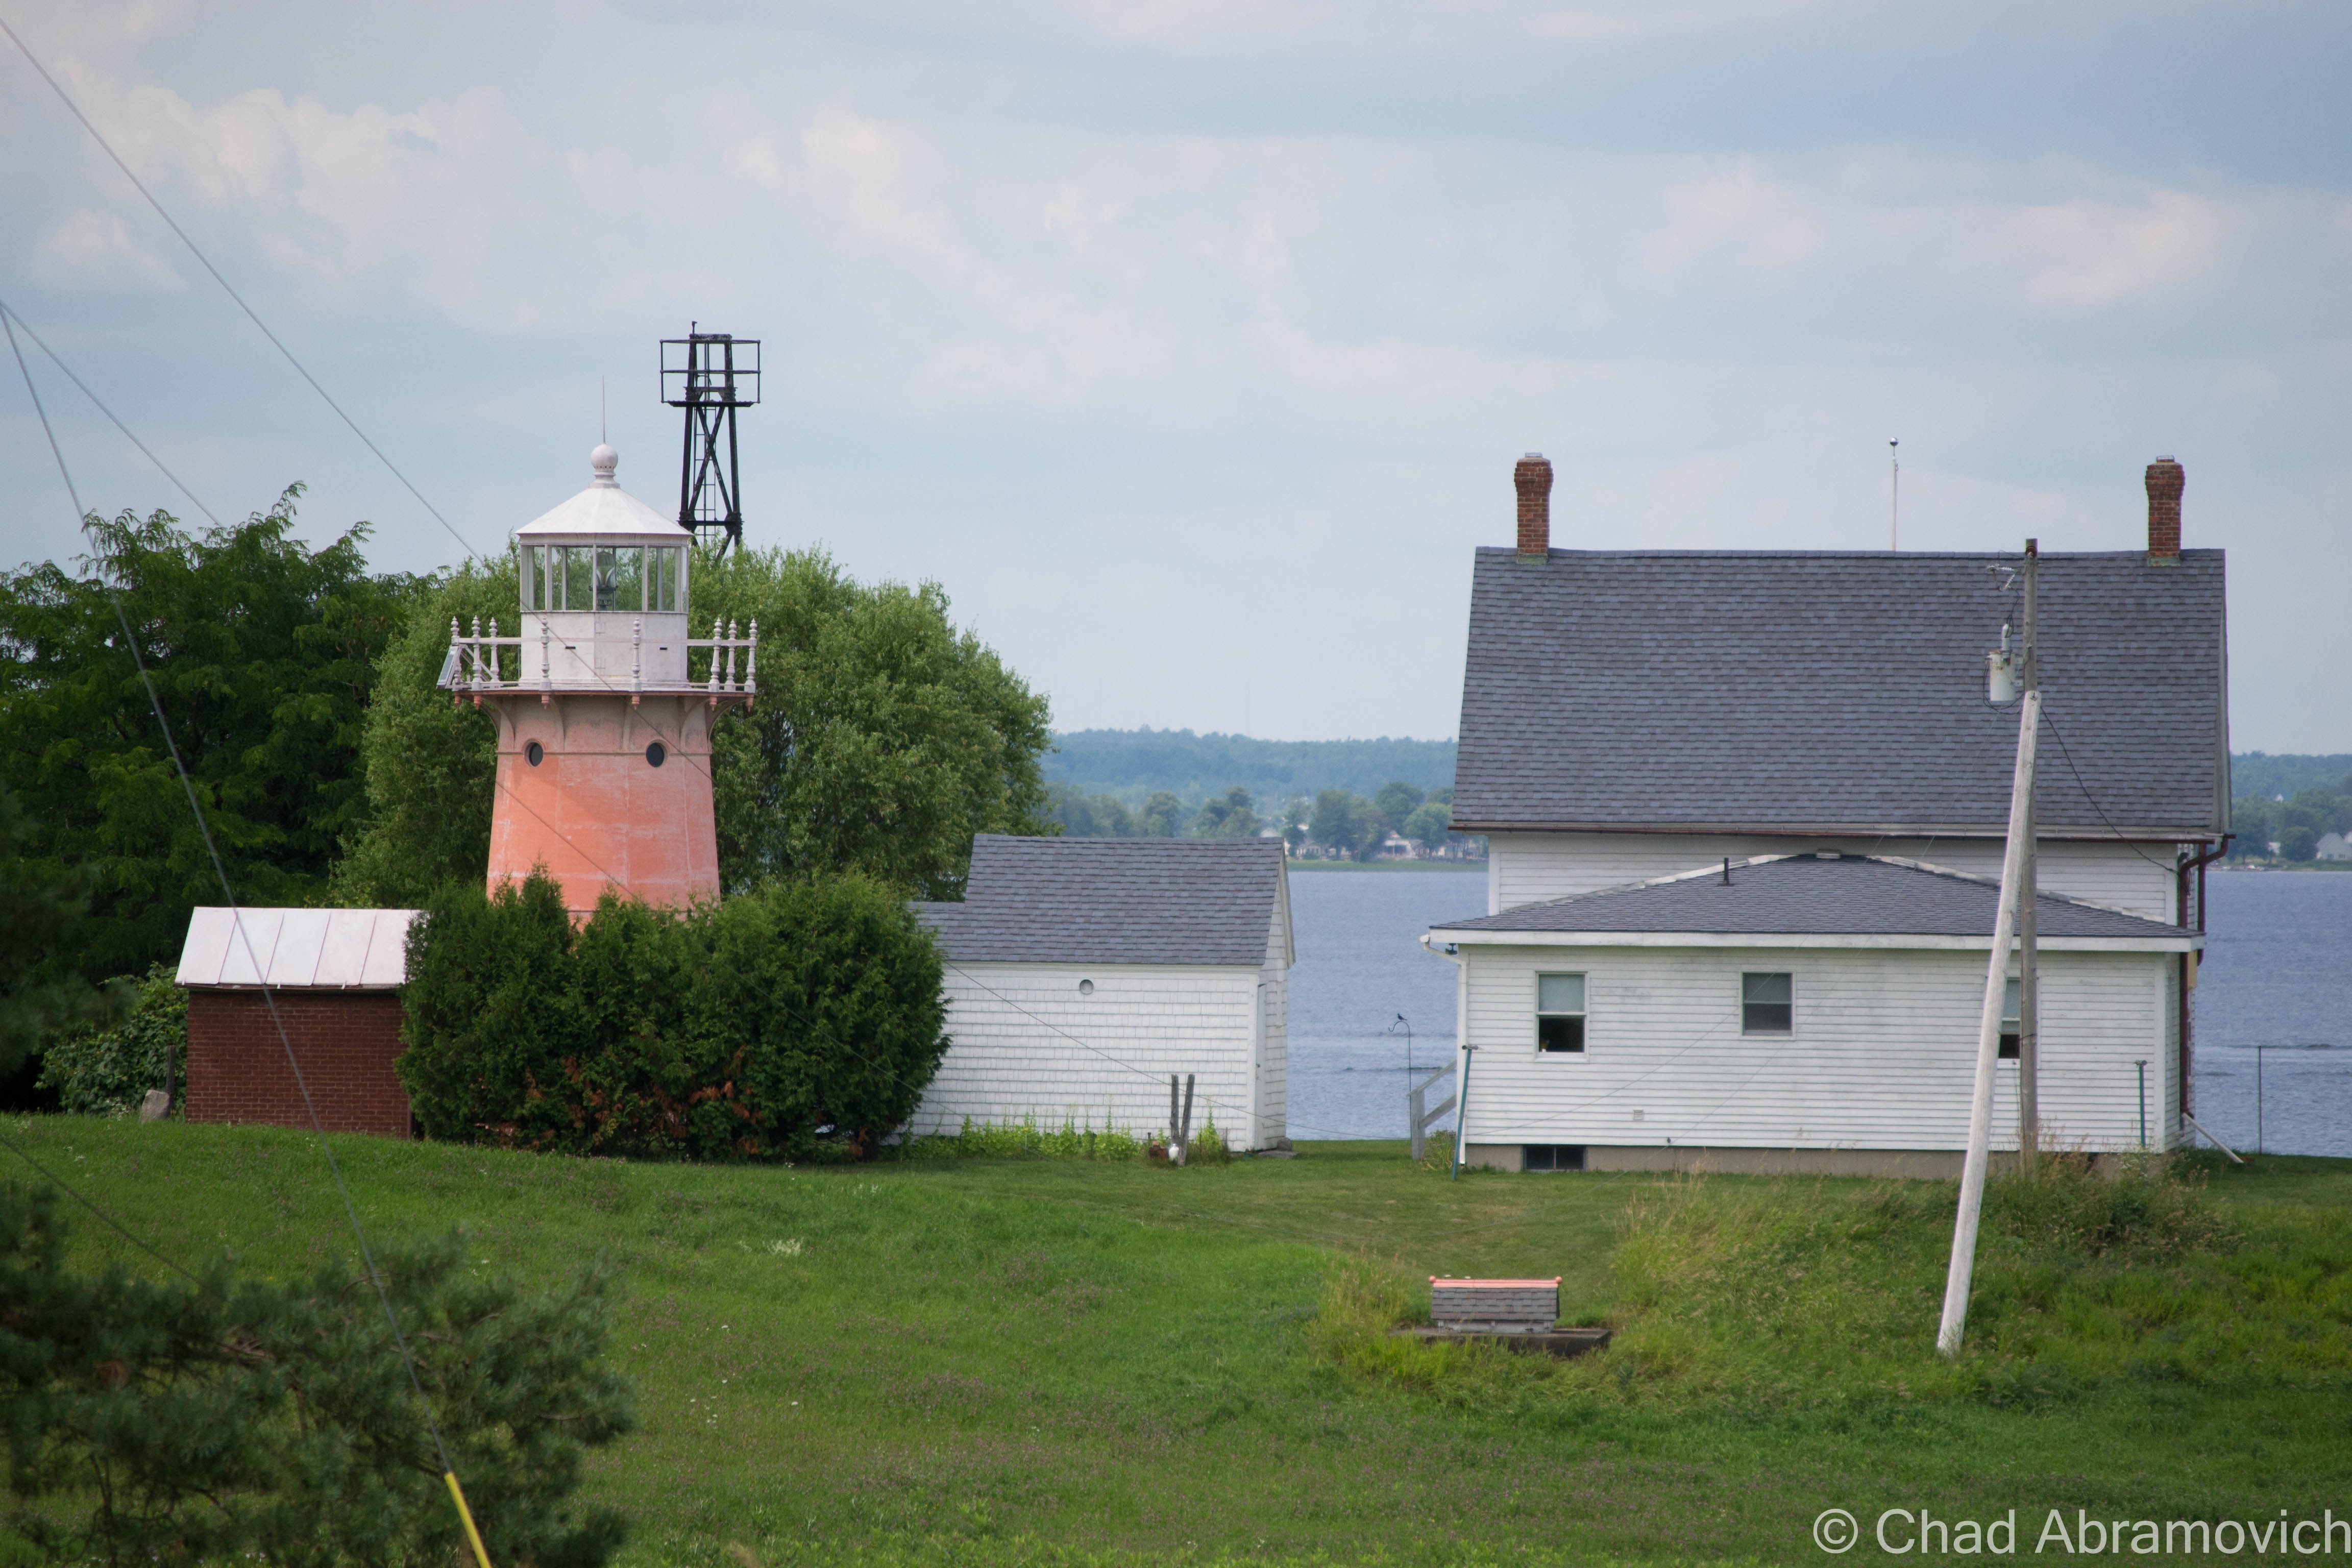 Isle La Motte's Lighthouse, as seen from North Point Road - the best place to get a good view of it, unless you have a boat or a kayak. 